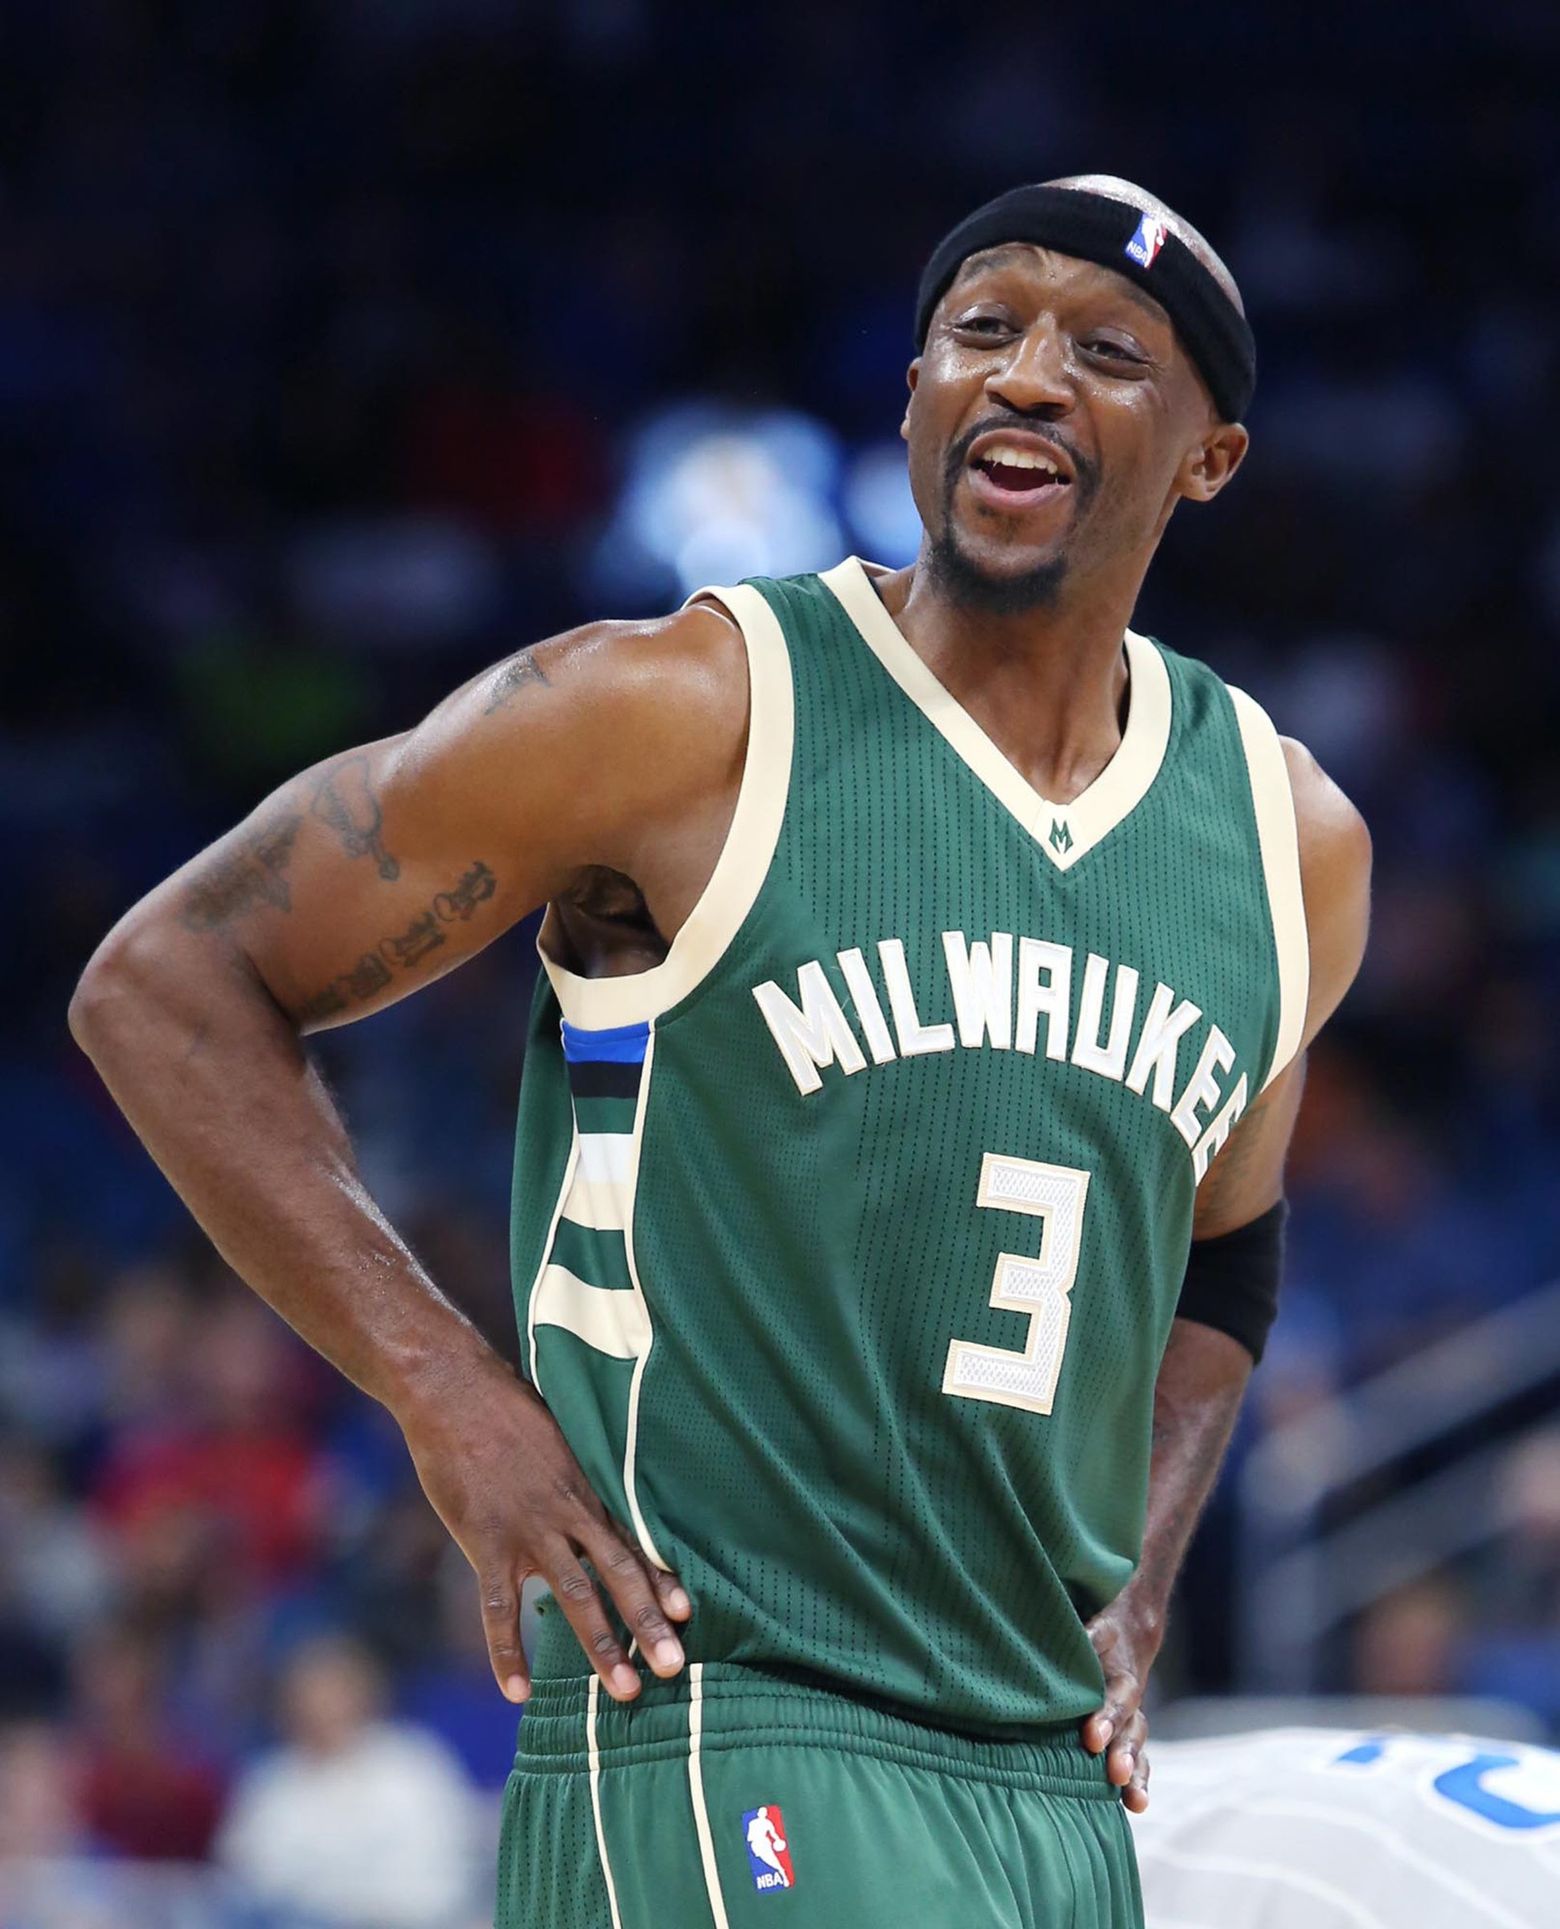 It's a great story': Former Mav Jason Terry reflects on NBA title win 7  years later